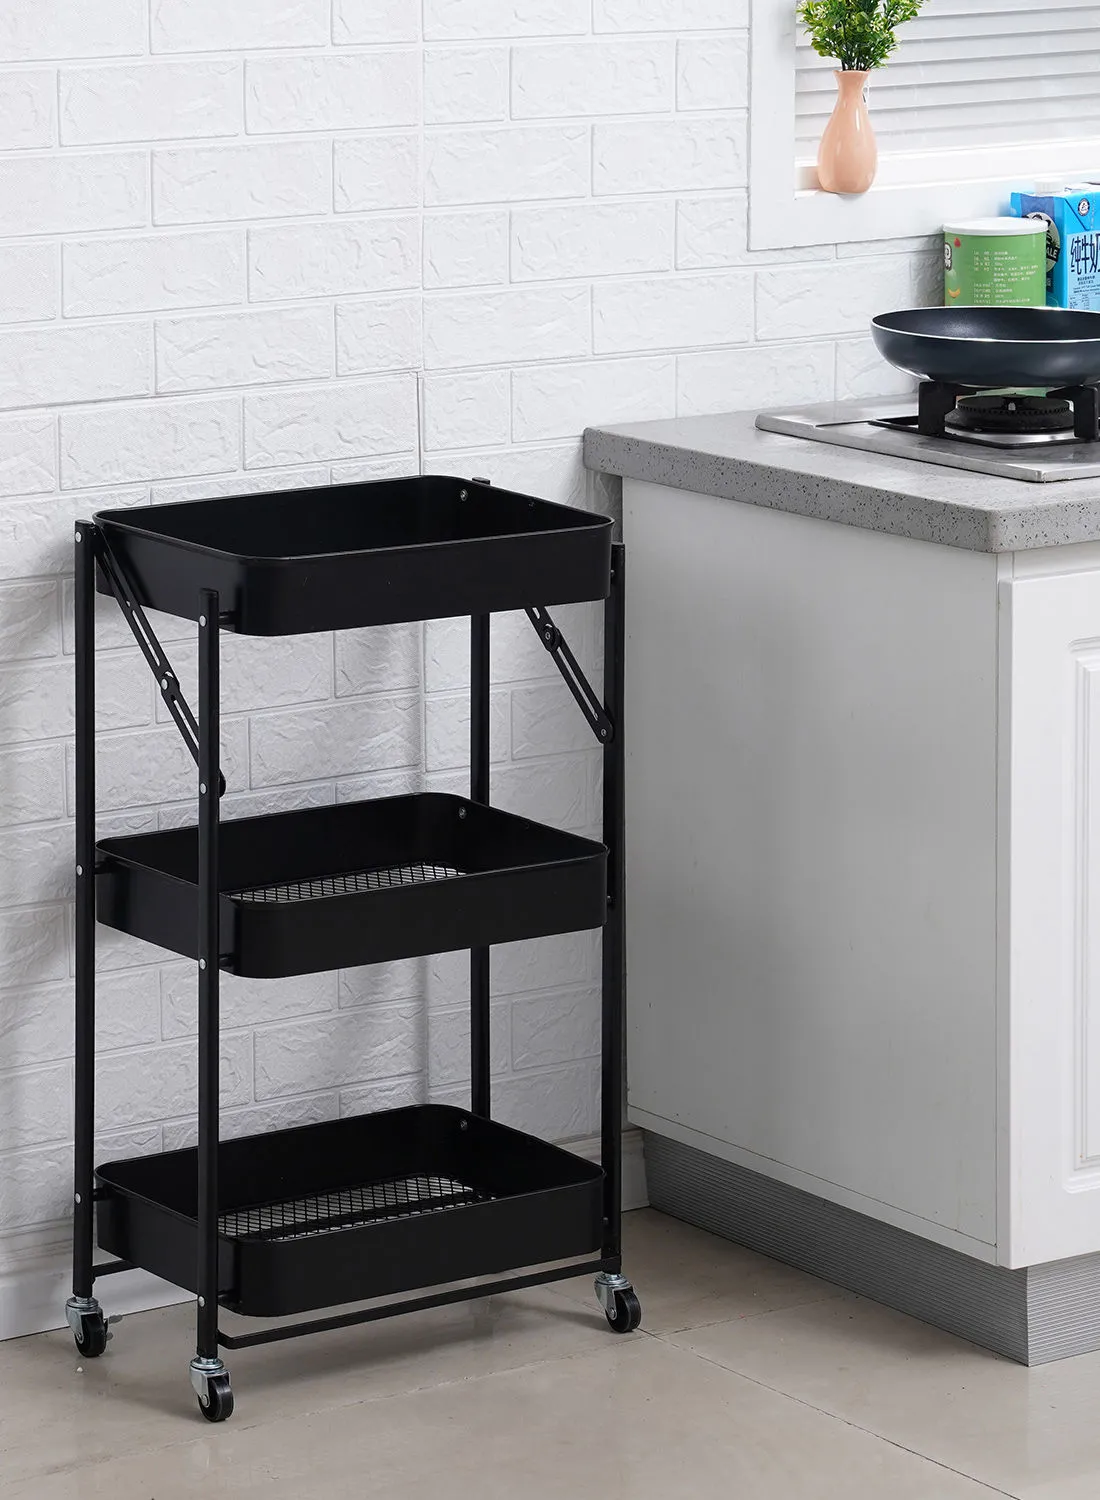 Amal Multipurpose 3 Tier Easy Foldable Trolley For Home, Convenient Storage for your Kitchen And Bathroom MT1012BK Black 97x48x5x8cm